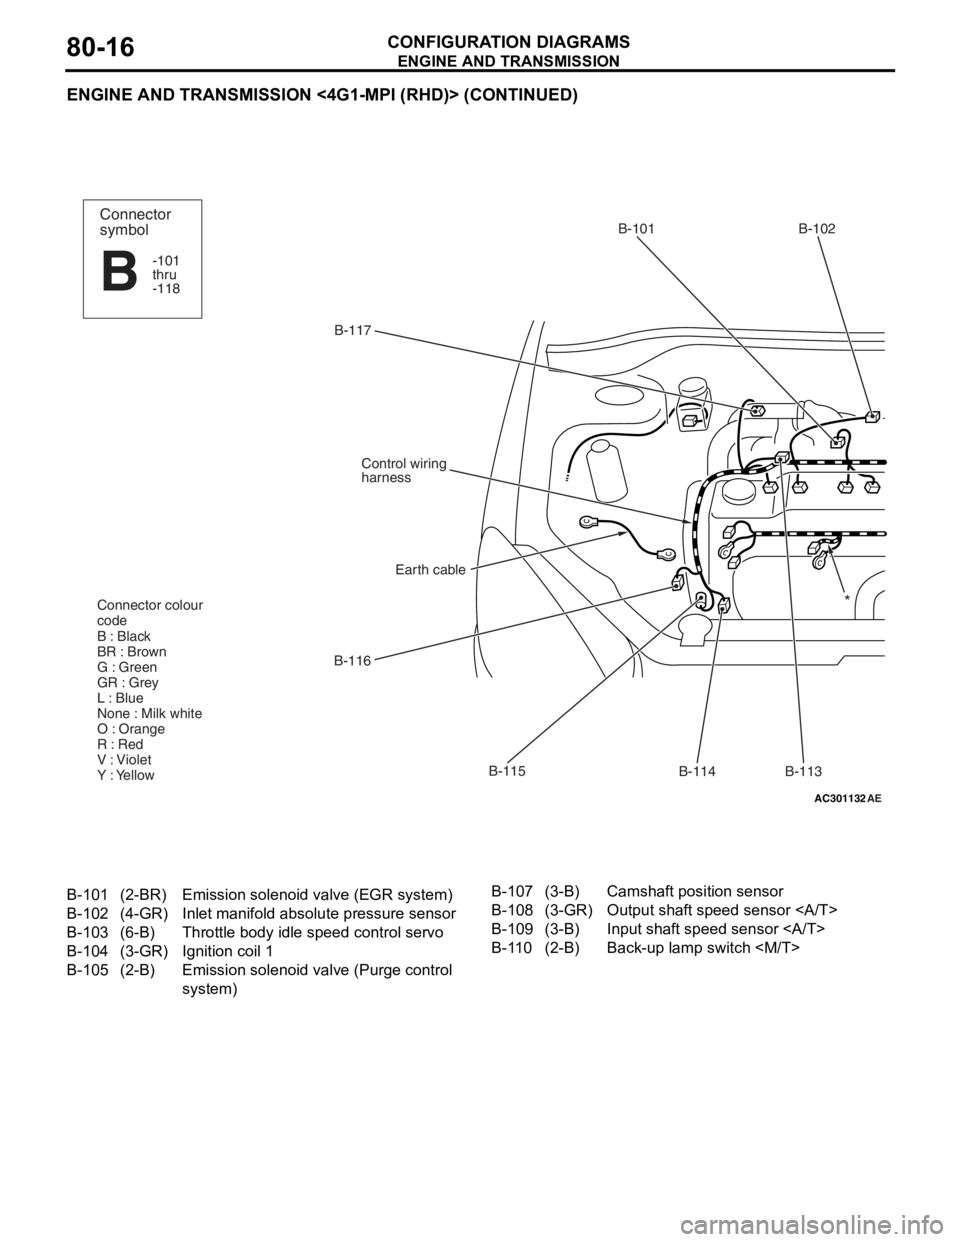 MITSUBISHI LANCER IX 2006  Service Manual 
ENGINE AND TRANSMISSION
CONFIGURATION DIAGRAMS80-16
ENGINE AND TRANSMISSION <4G1-MPI (RHD)> (CONTINUED)
AC301132AE
B-117B-101 B-102
B-113
B-114
B-115
B-116
Earth cable
Control wiring
harness
Connecto